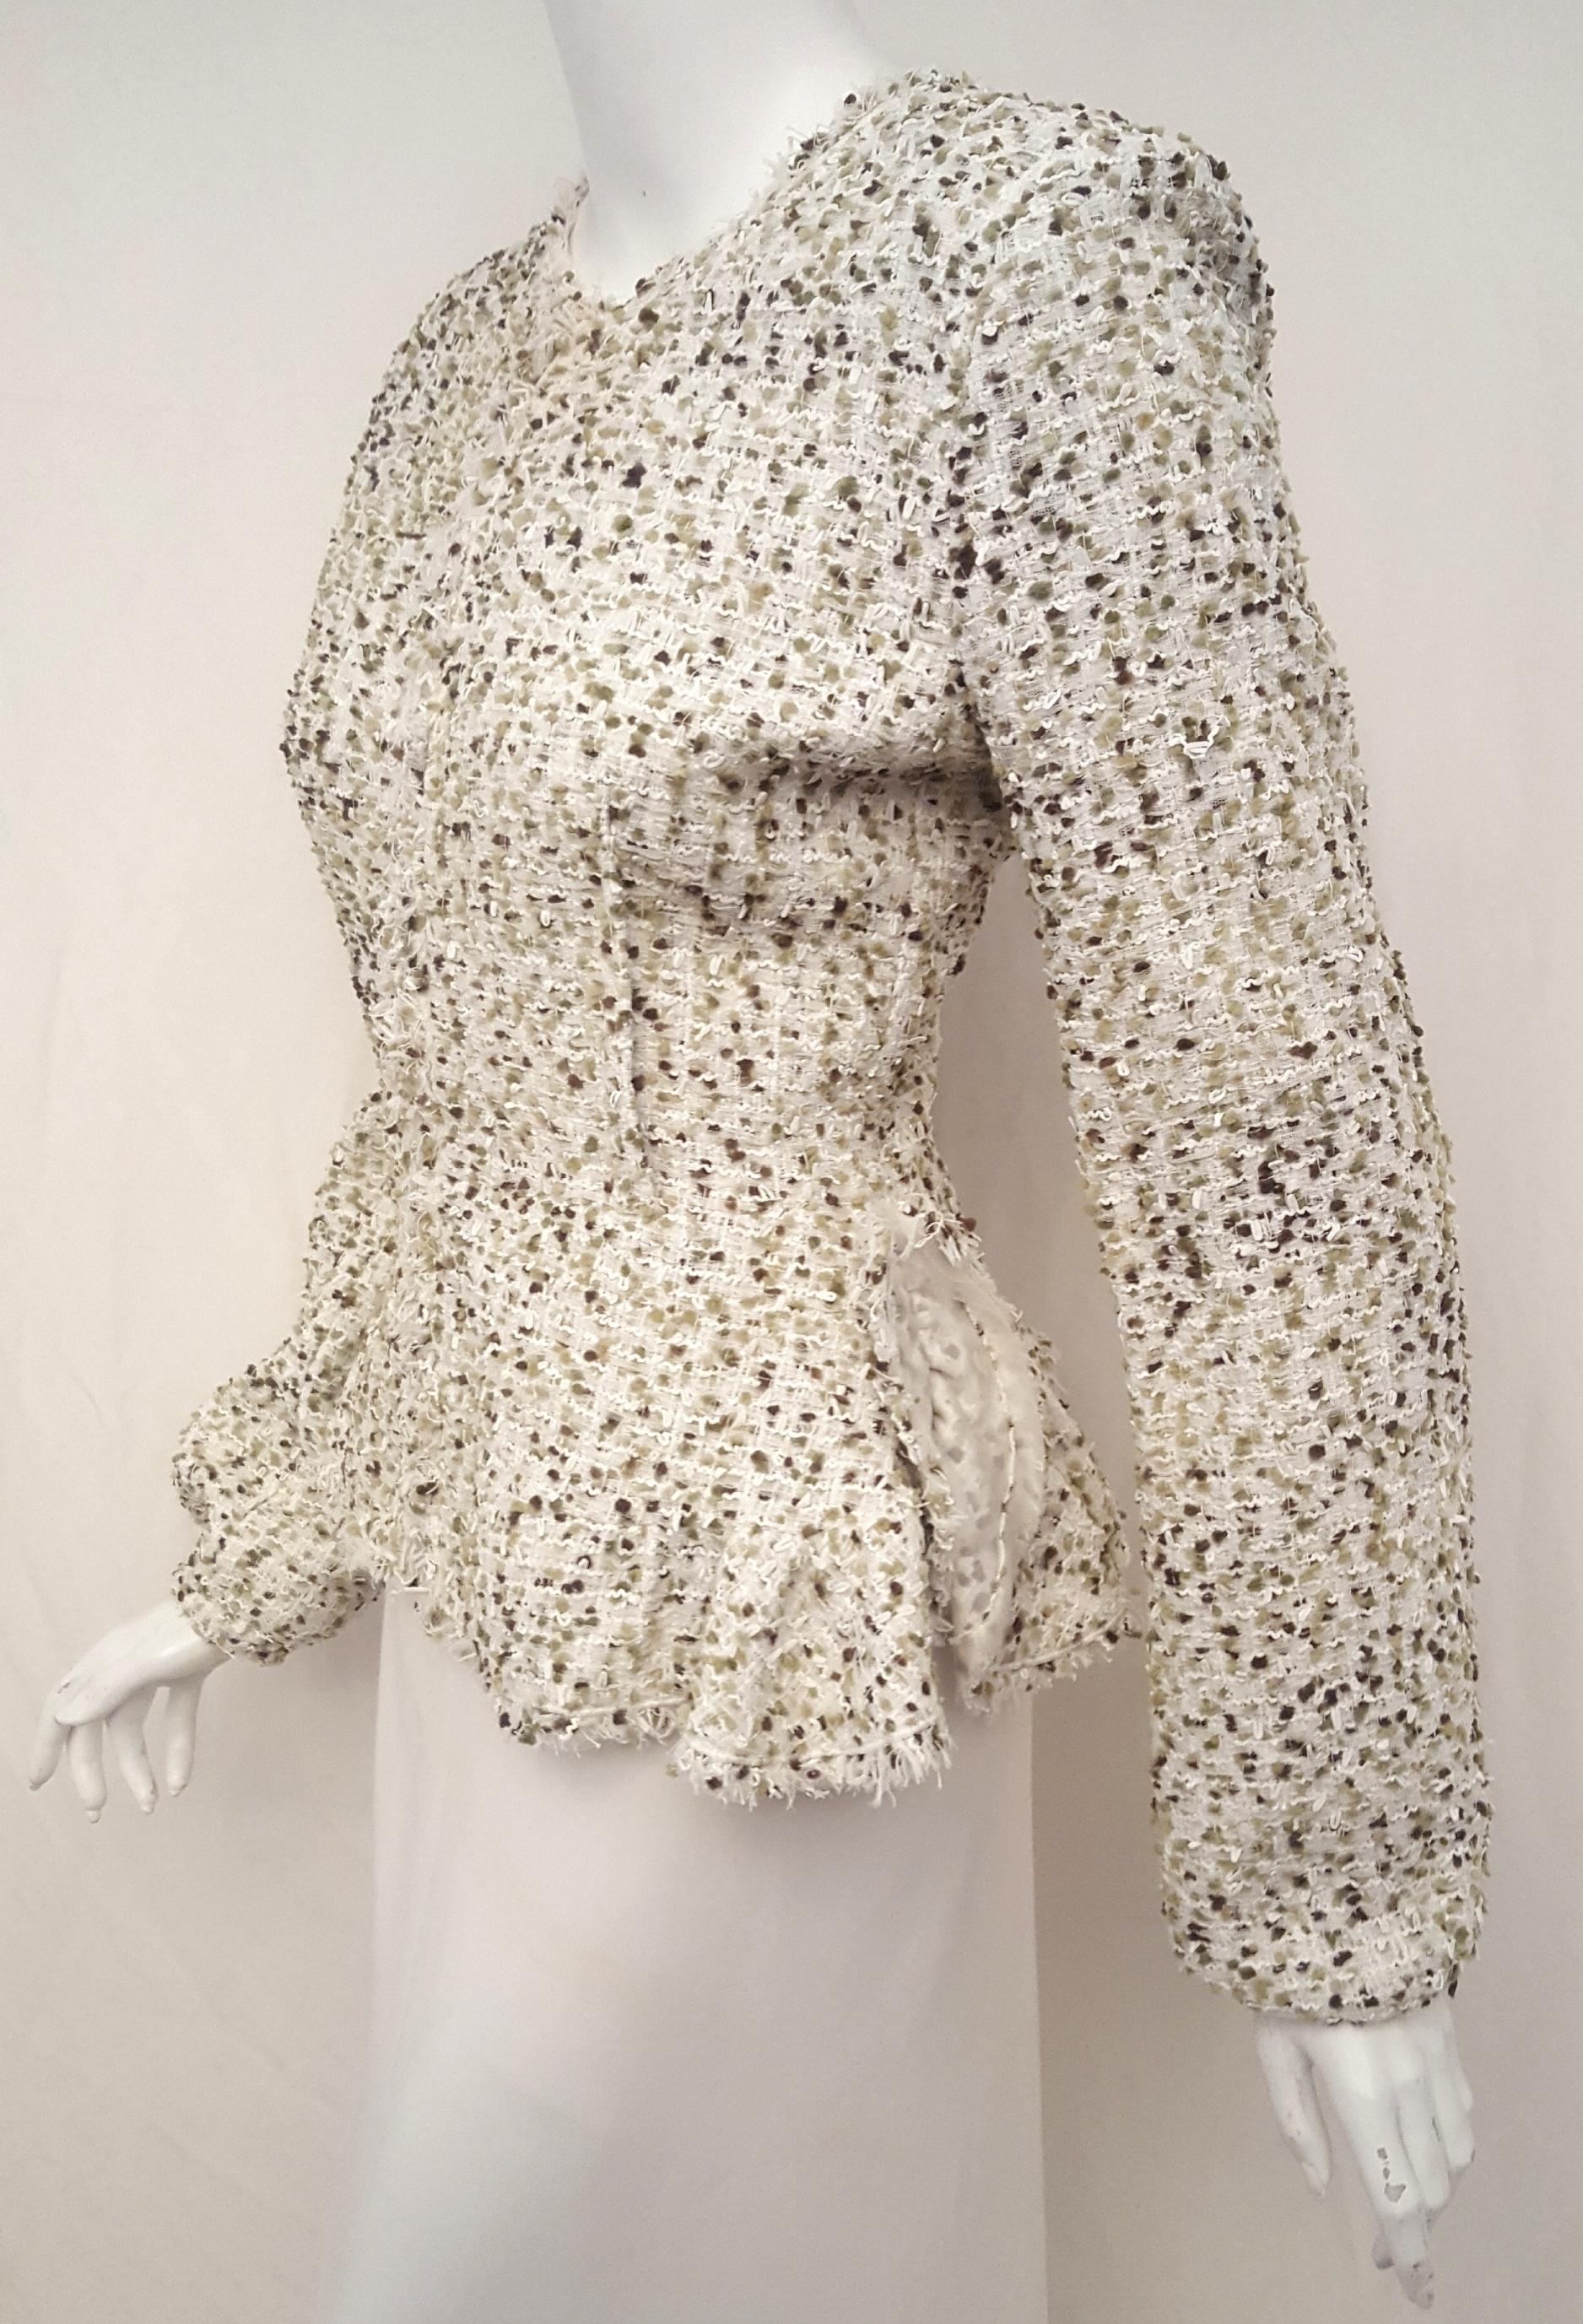 Giambattista Valli's bouclé jacket is the picture of ladylike elegance with a soft silhouette. The textured fabric features green, brown and white yarn intertwined with gold tone threads throughout for a playful and glimmer element. This no collar